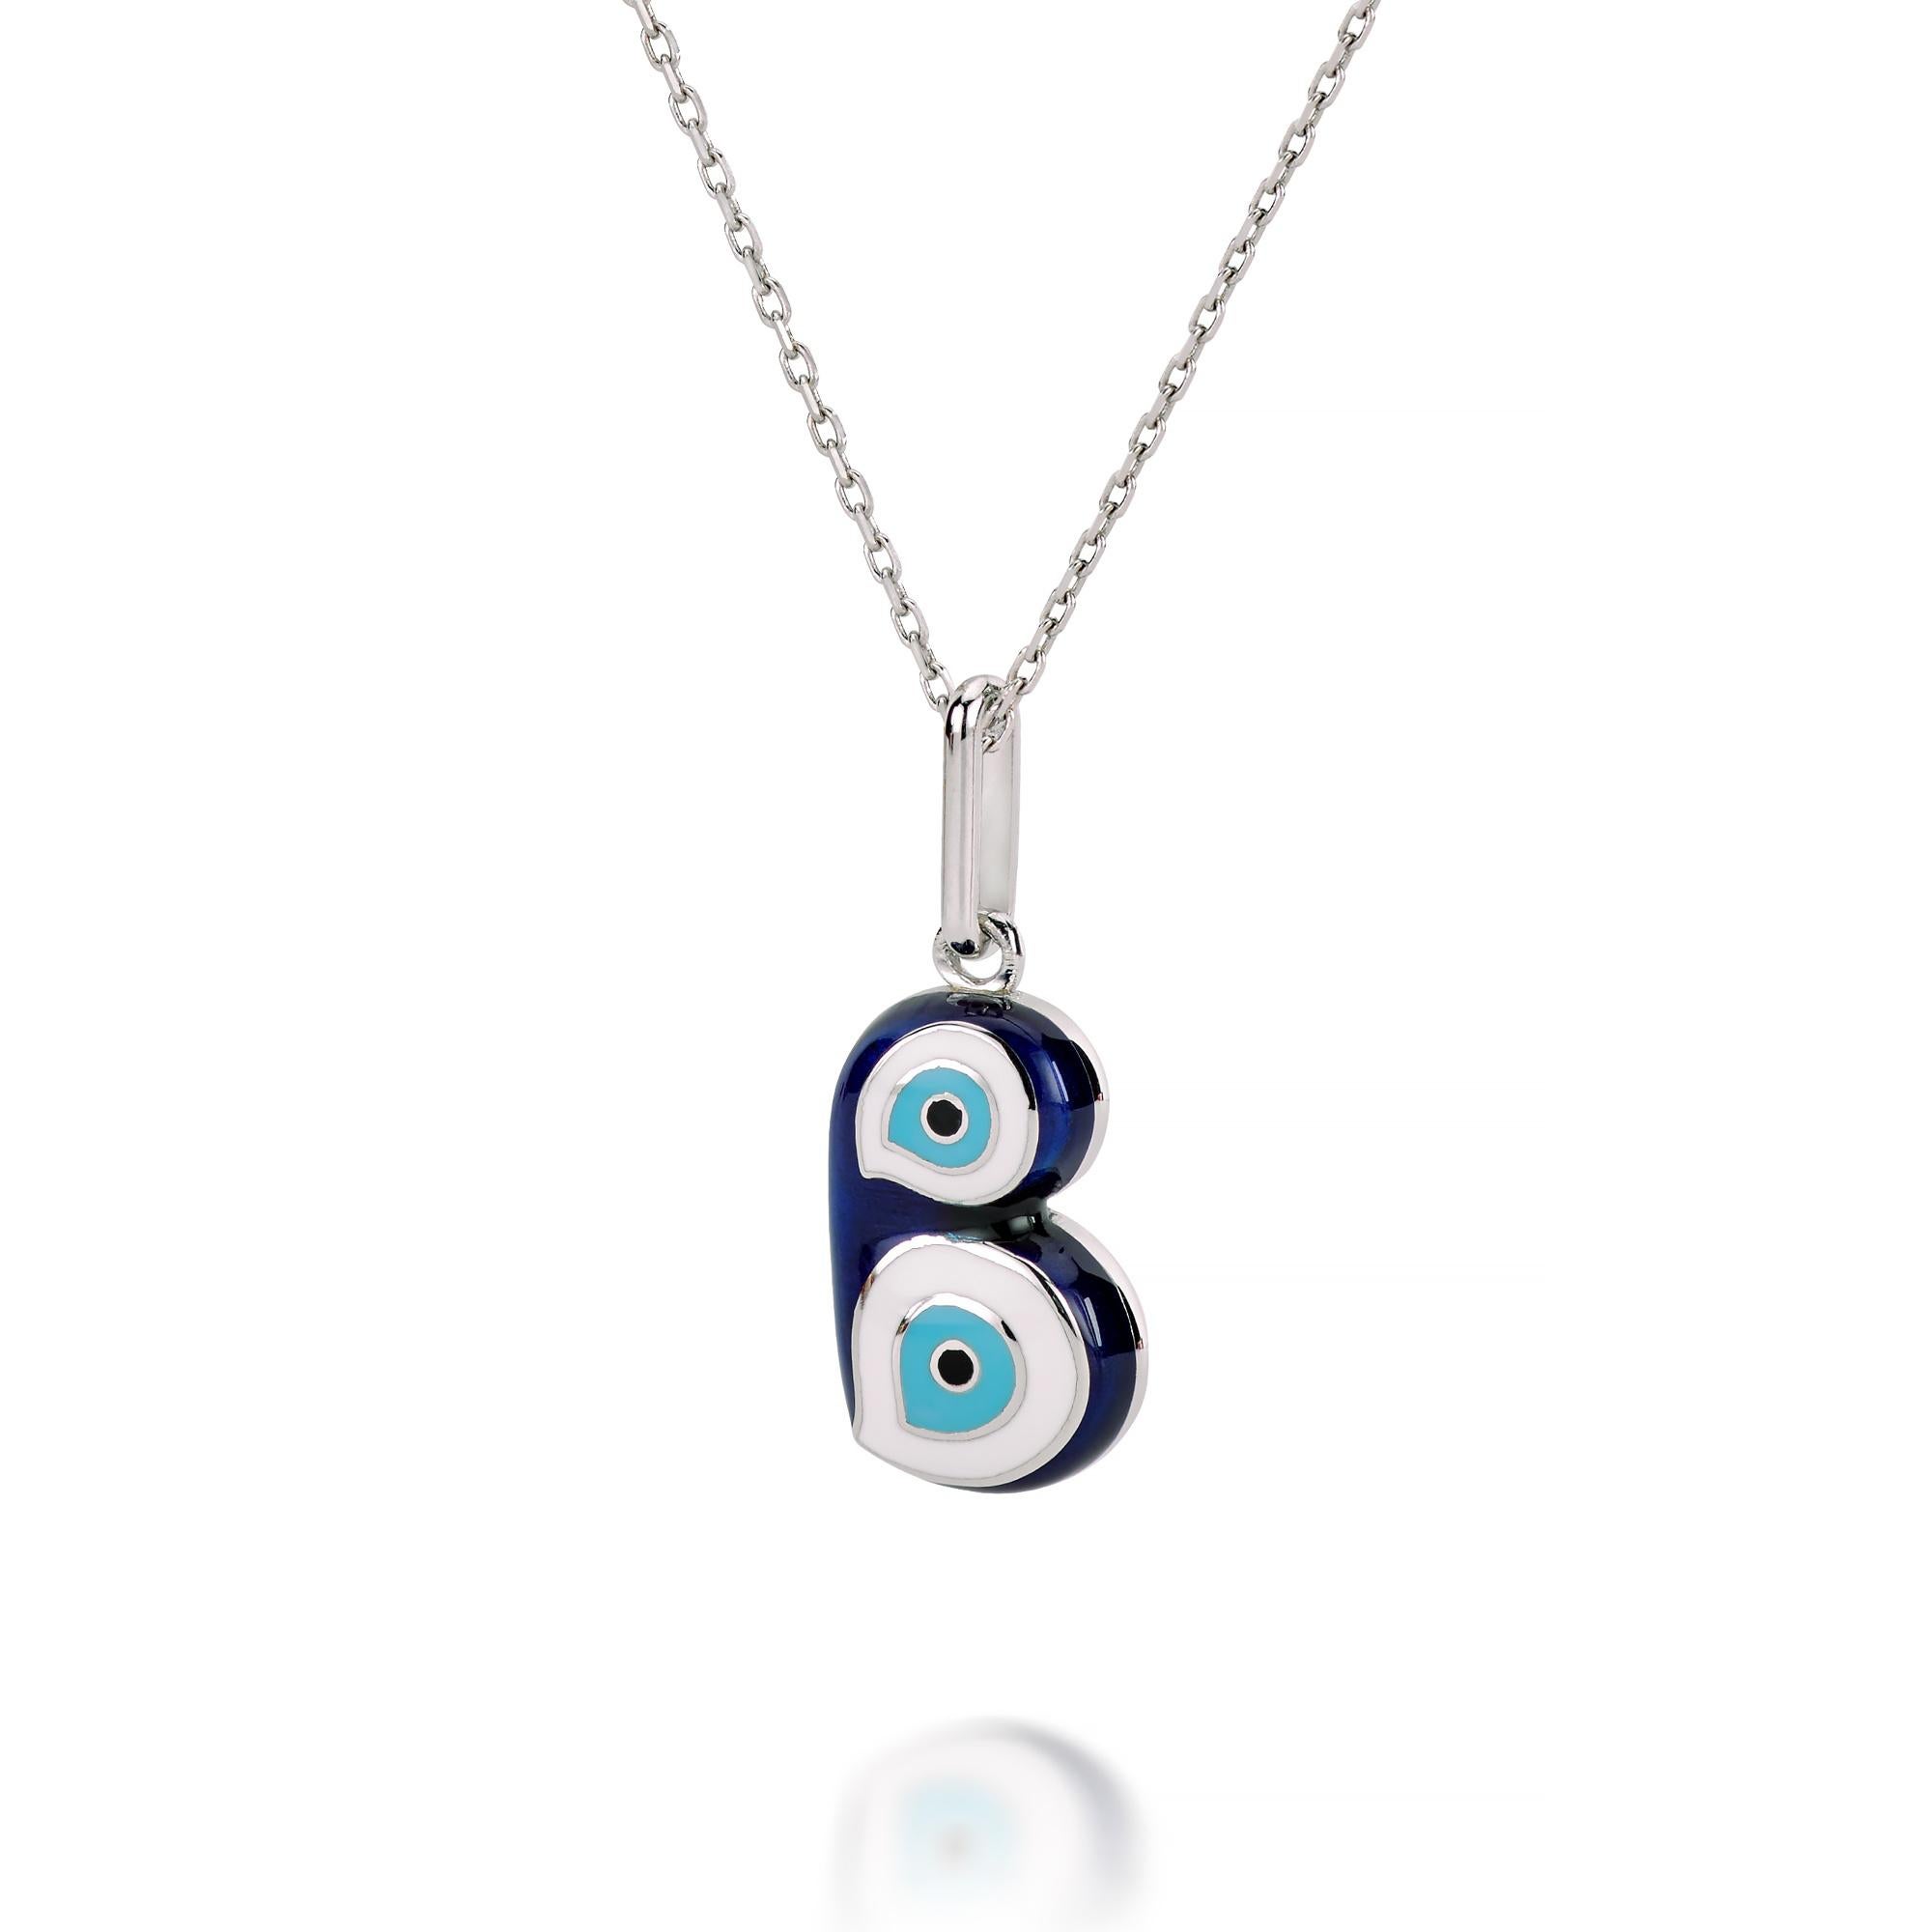 The Nazarlique Evil Eye ID Letter Form, B Charm Handcrafting Blue Enamel Necklace In 14K Gold, Is A Striking Example Of The Sentimental Style.
Beautifully Timeless And Personal To Each Wearer, Initial B Pendant Necklace Was Designed To Be Treasured